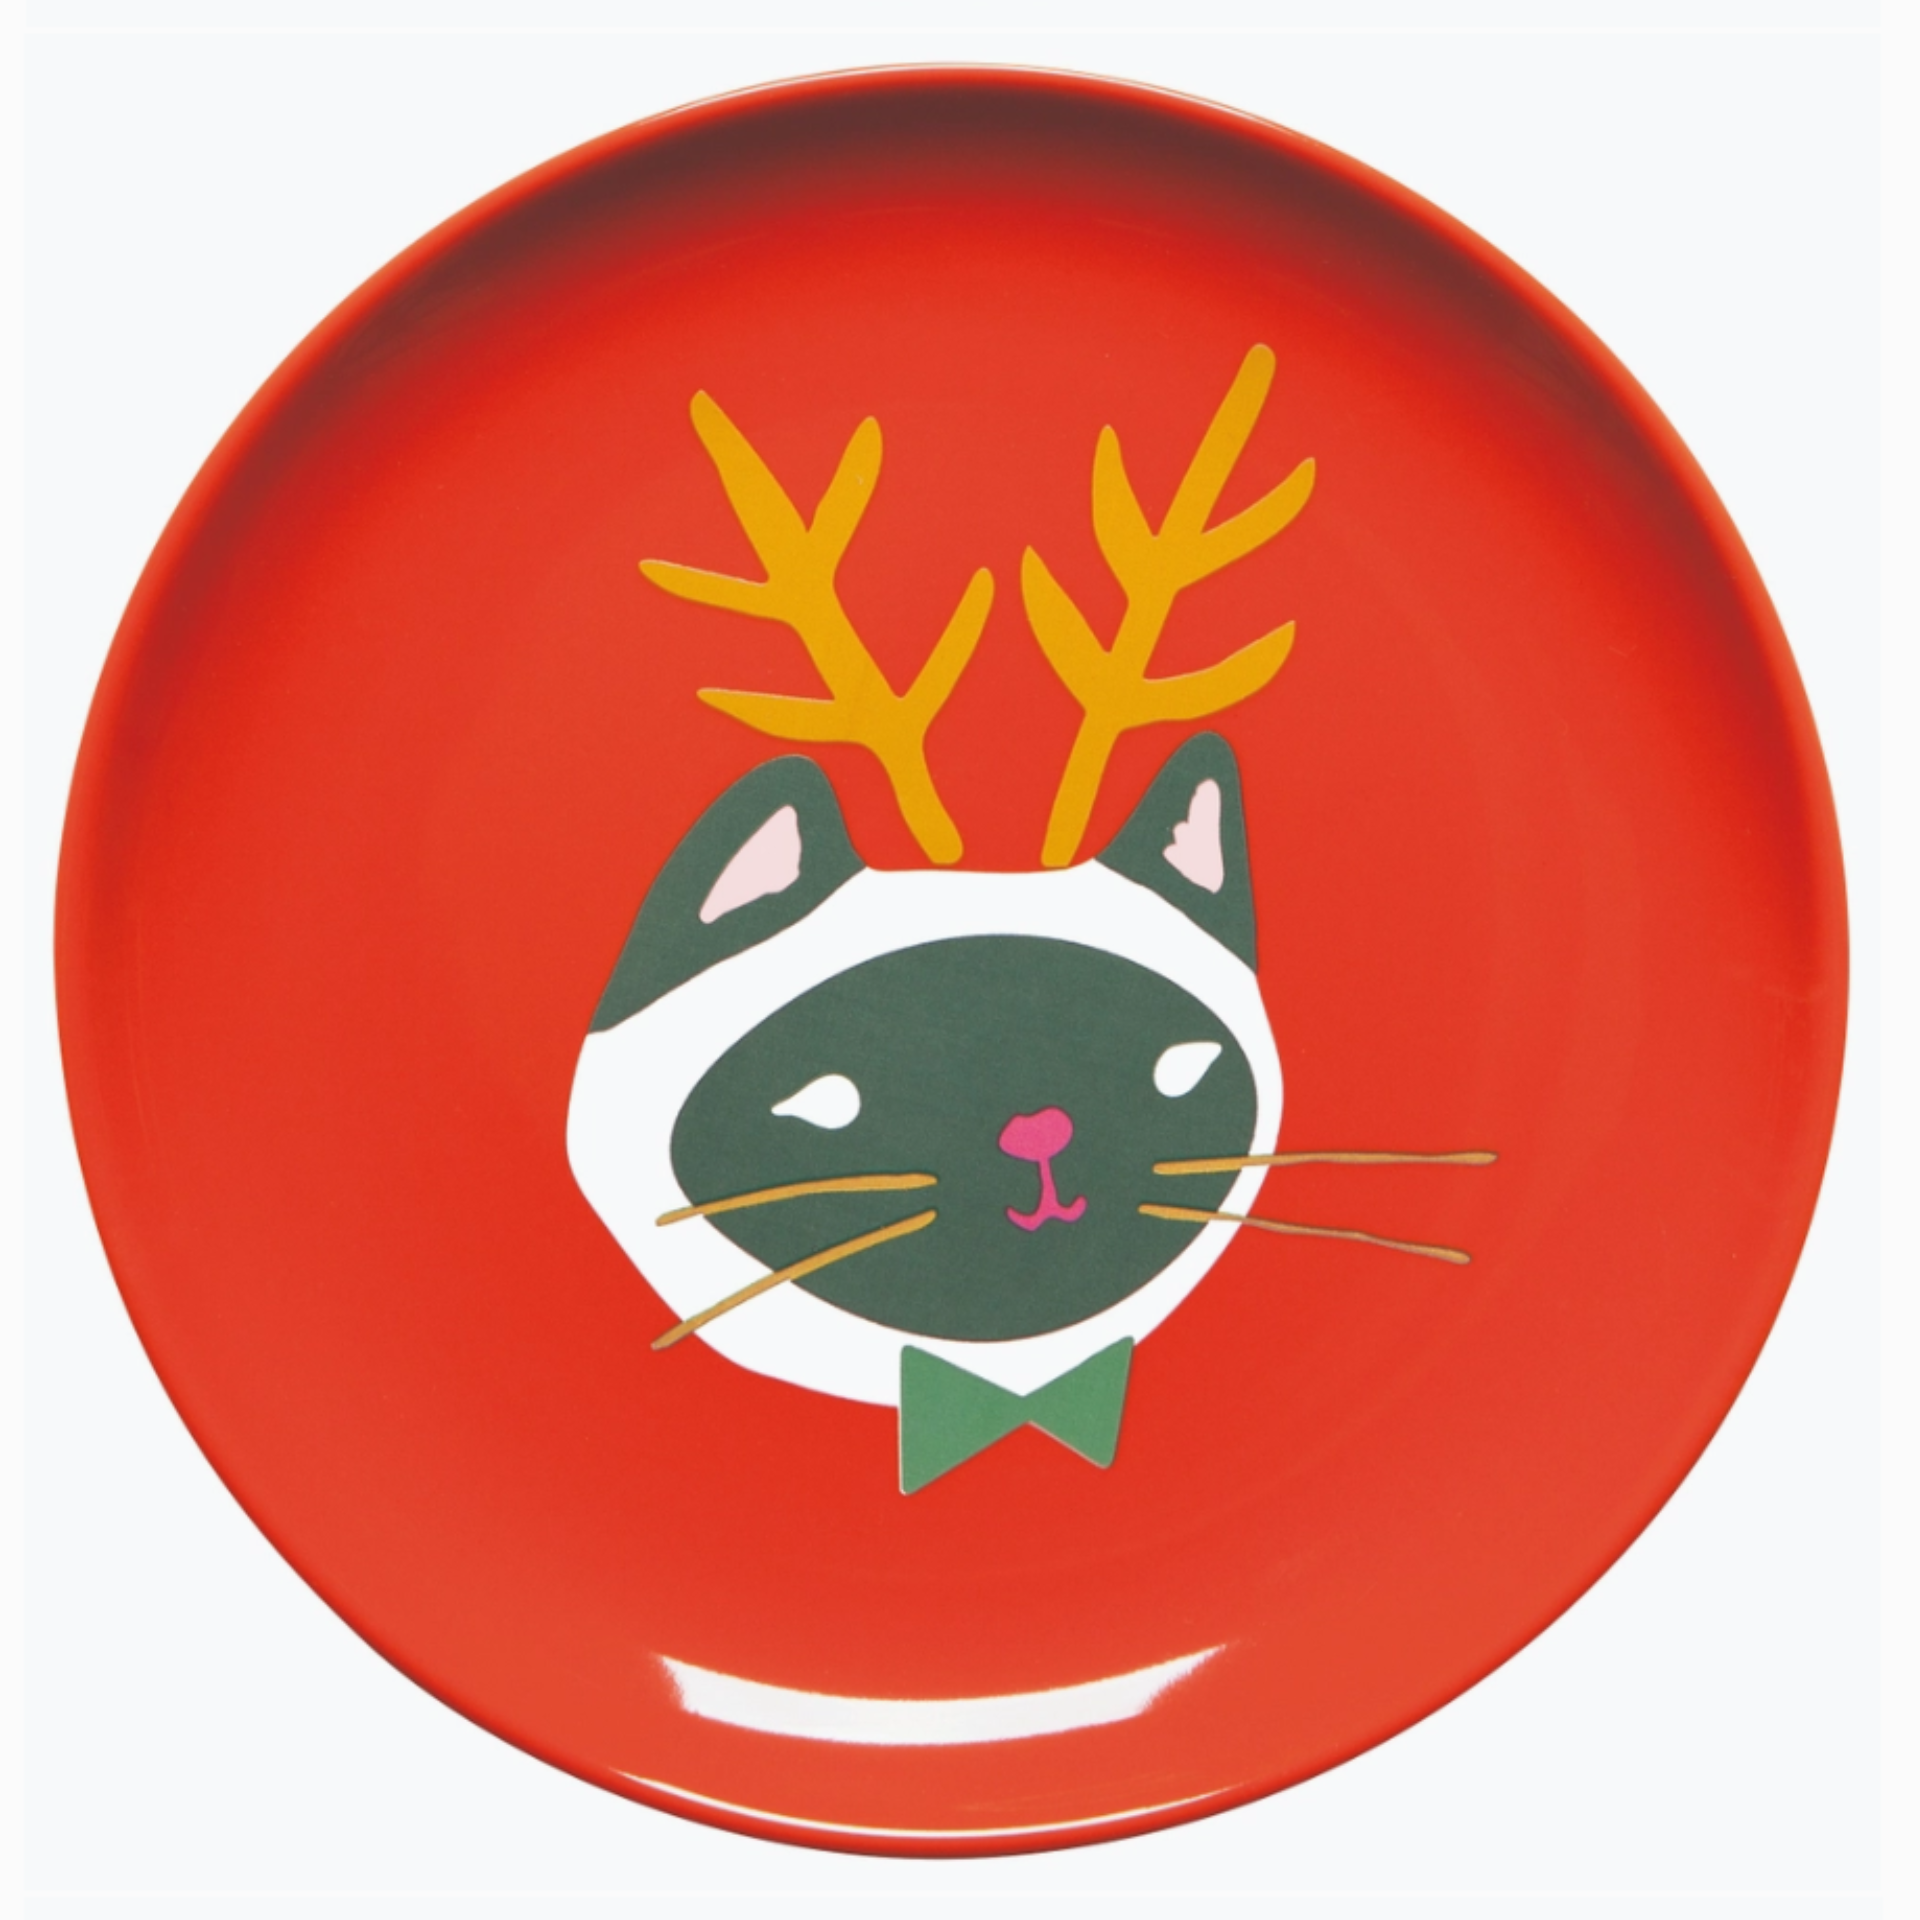 Let It Meow Christmas Appetizer Plate showcasing a cat adorned with a festive bow tie and antlers.